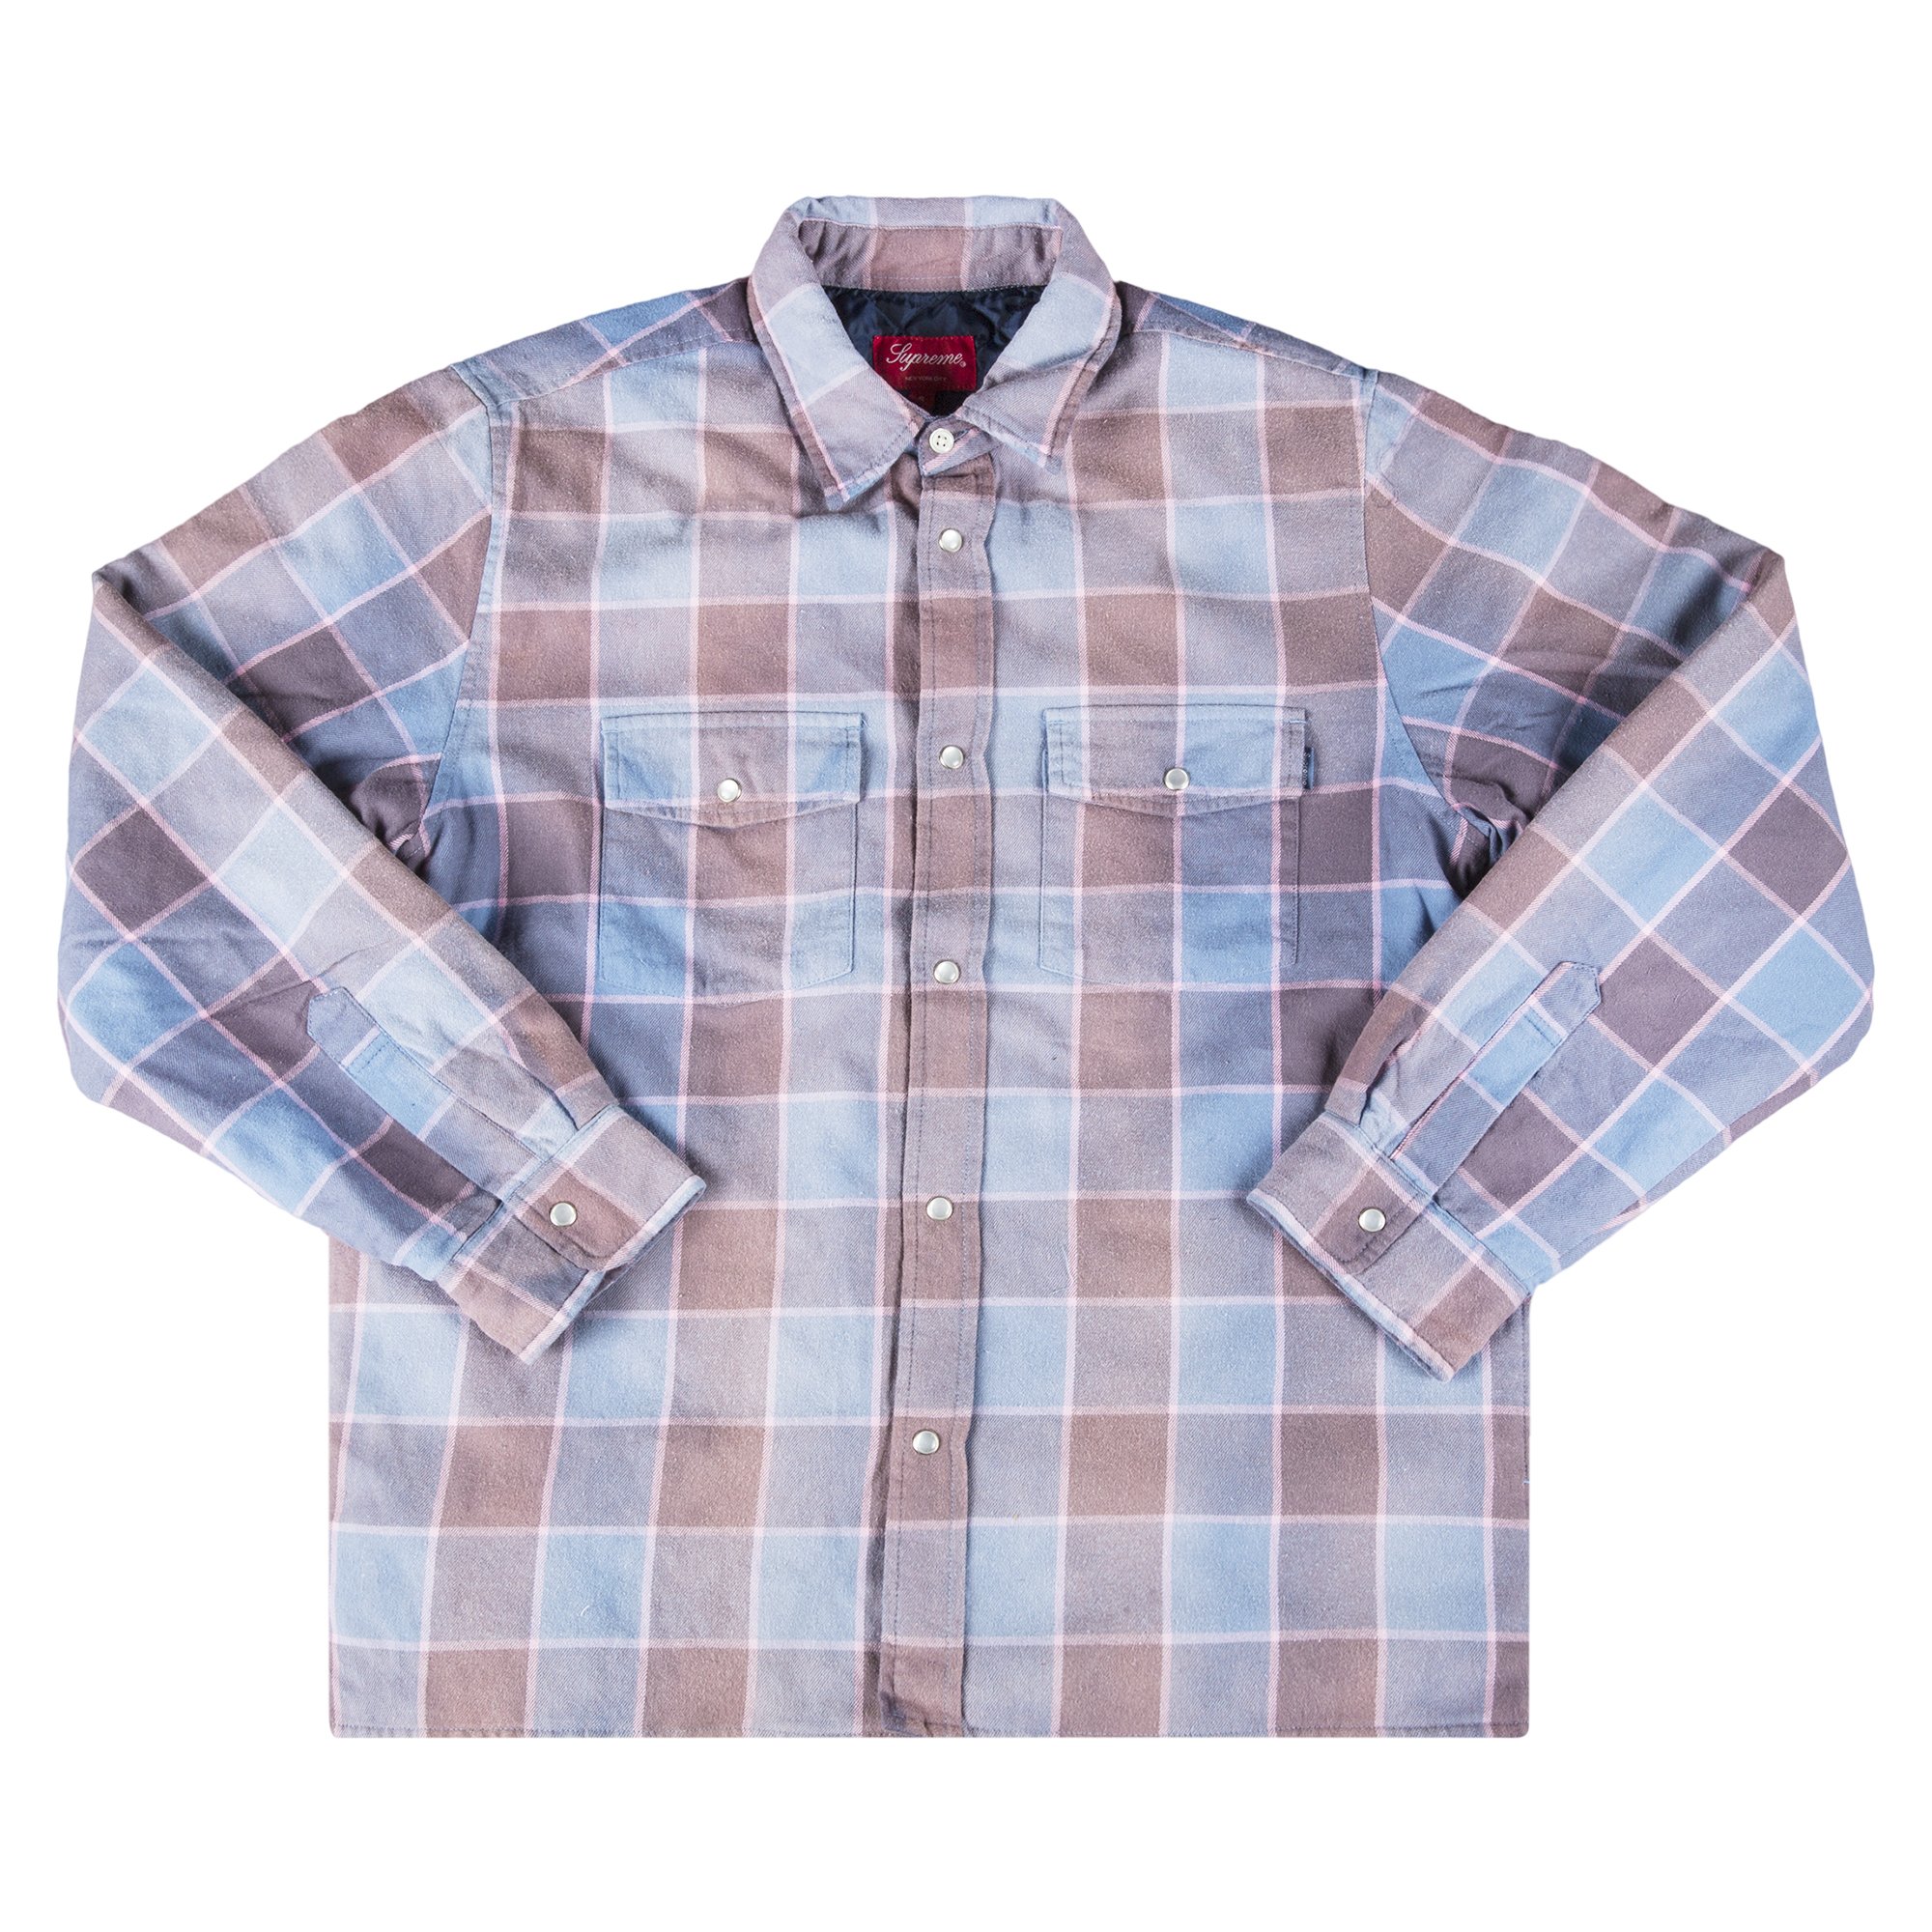 Buy Supreme Quilted Faded Plaid Flannel 'Blue' - FW18S99 BLUE | GOAT